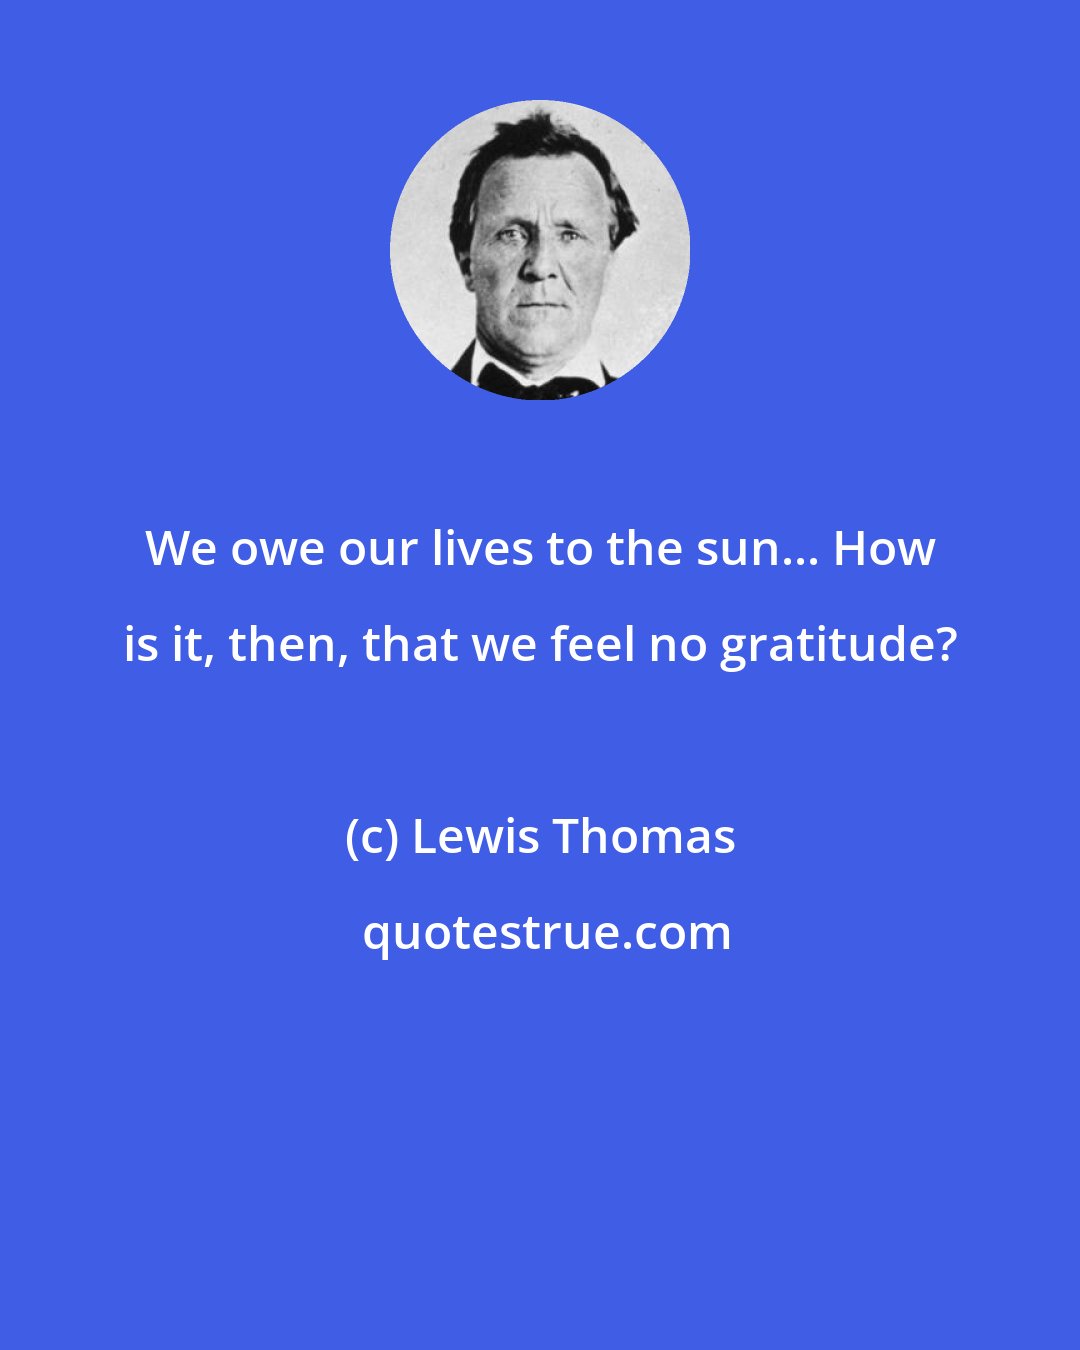 Lewis Thomas: We owe our lives to the sun... How is it, then, that we feel no gratitude?